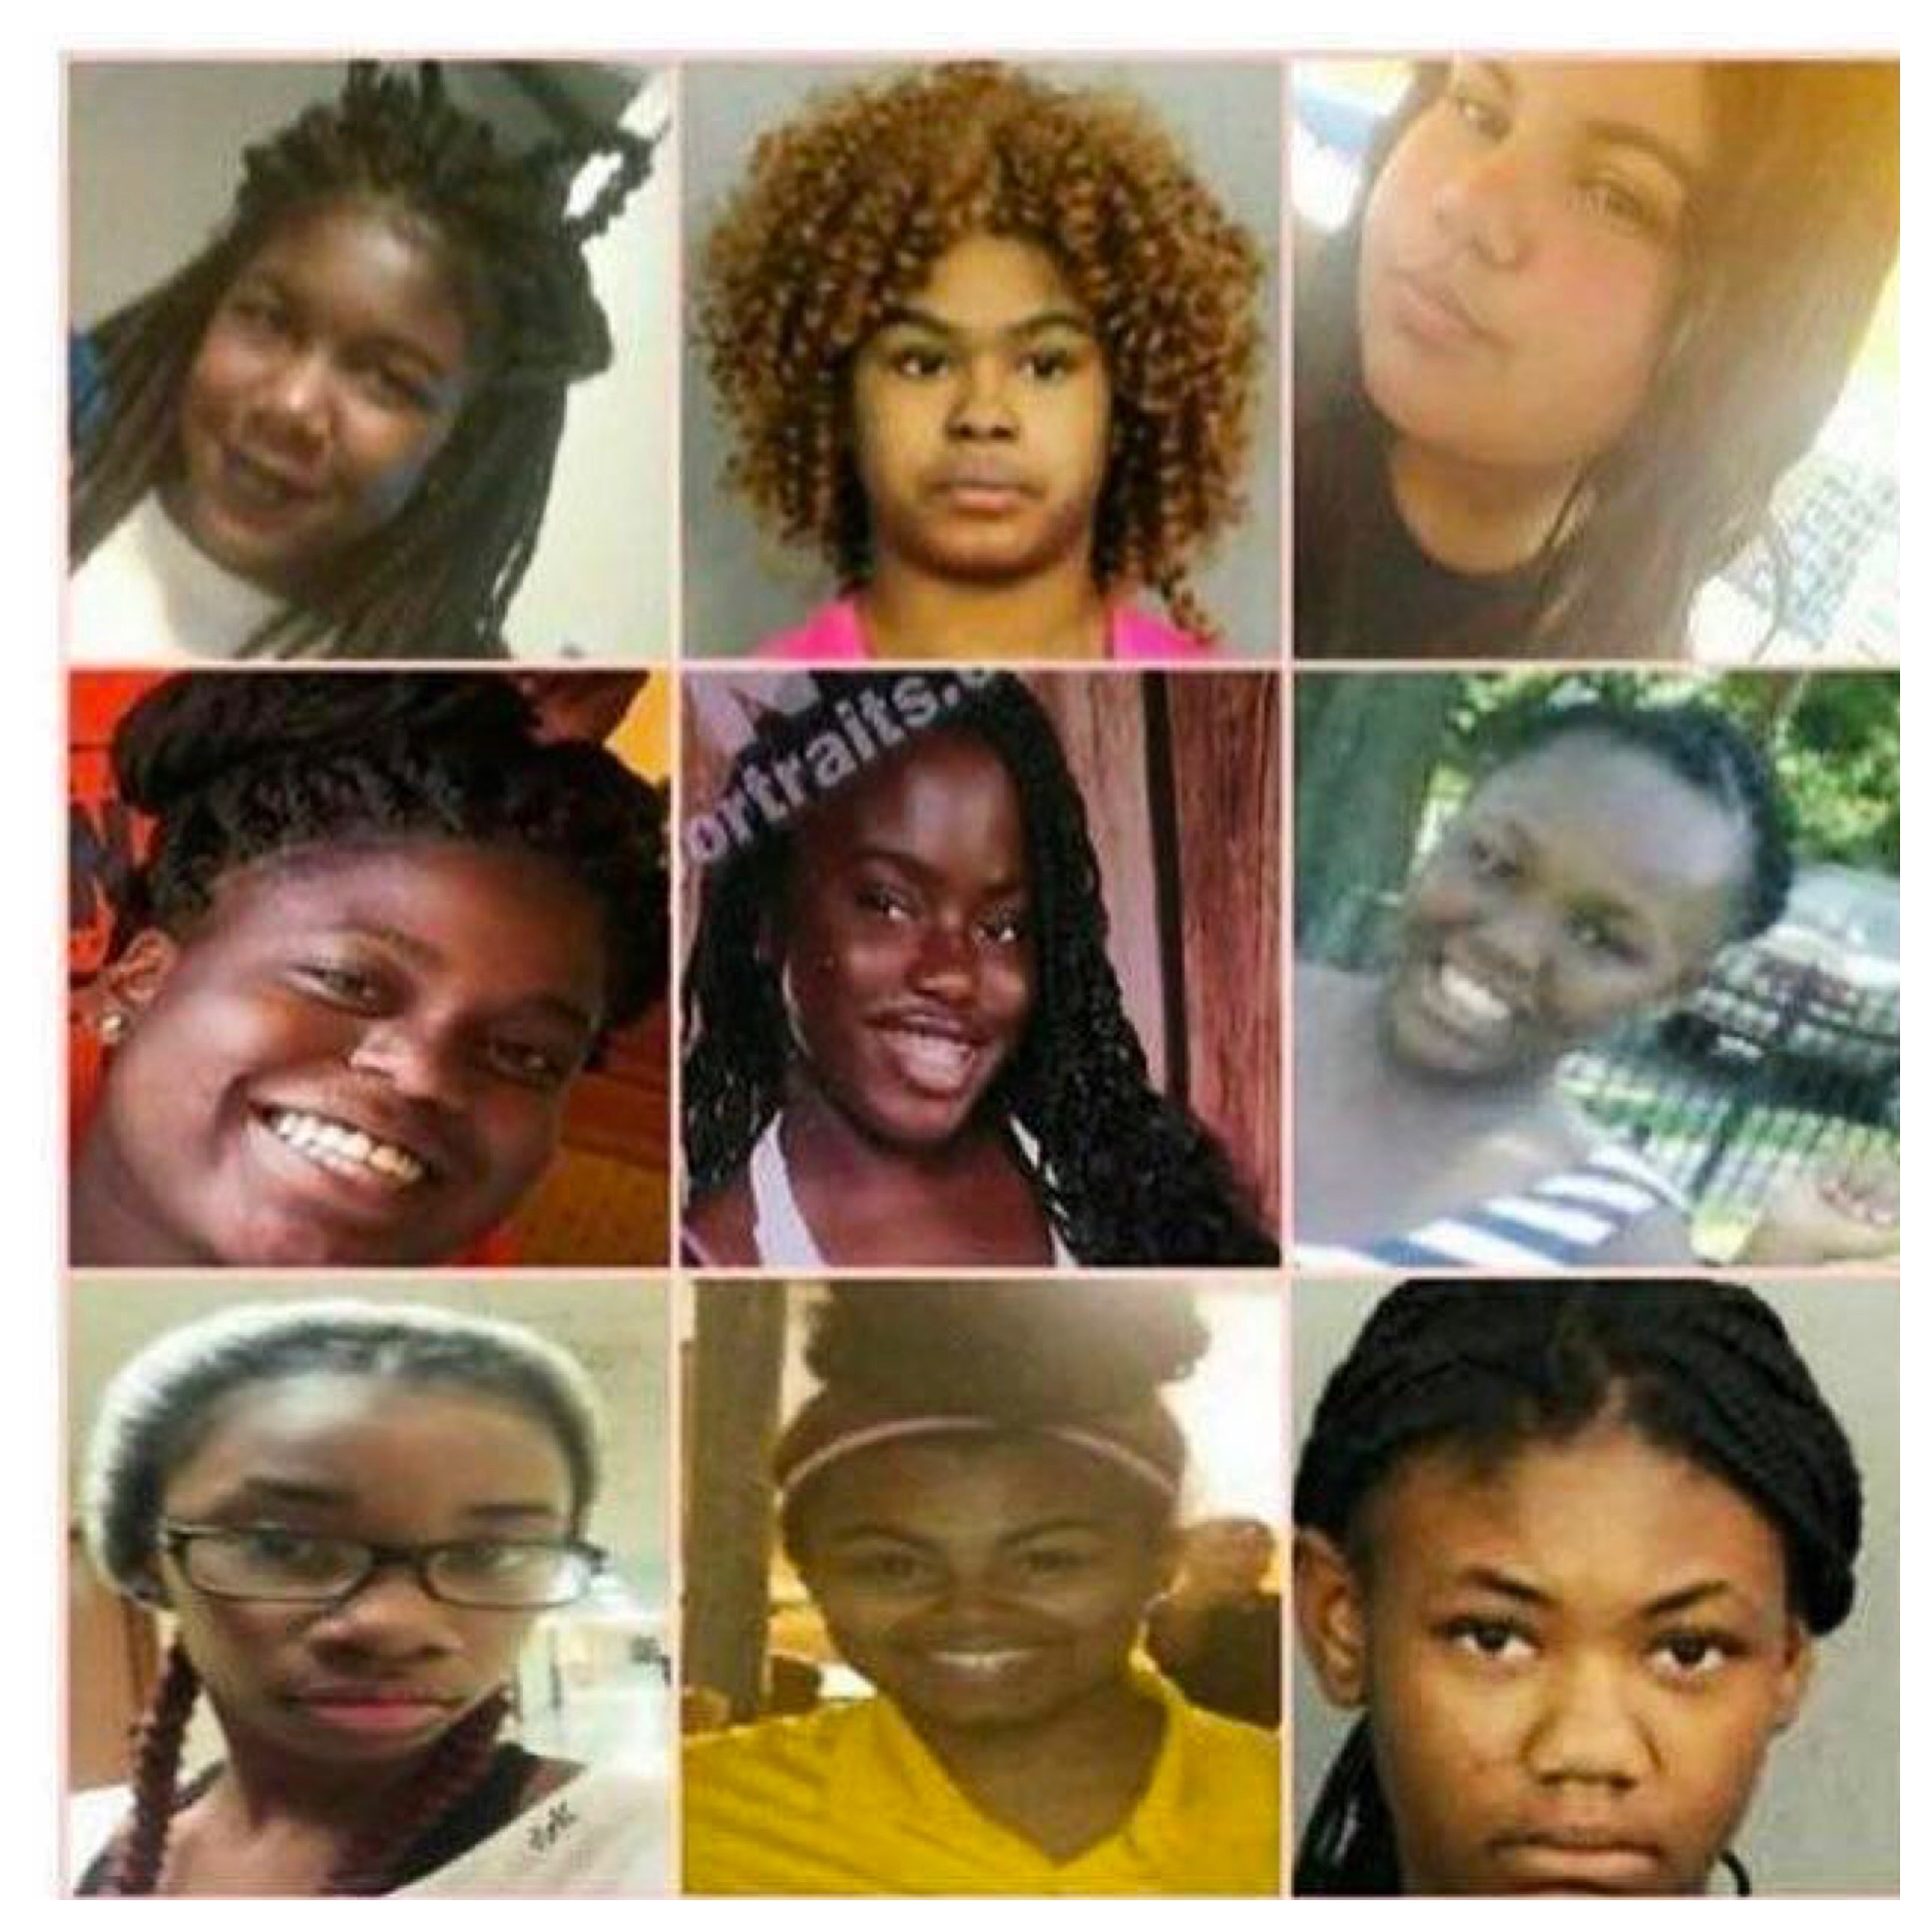 More Media Coverage PLEASE! 10 Black And Latina Girls Have Gone Missing Within A Week, And Nobody’s Talking About It.